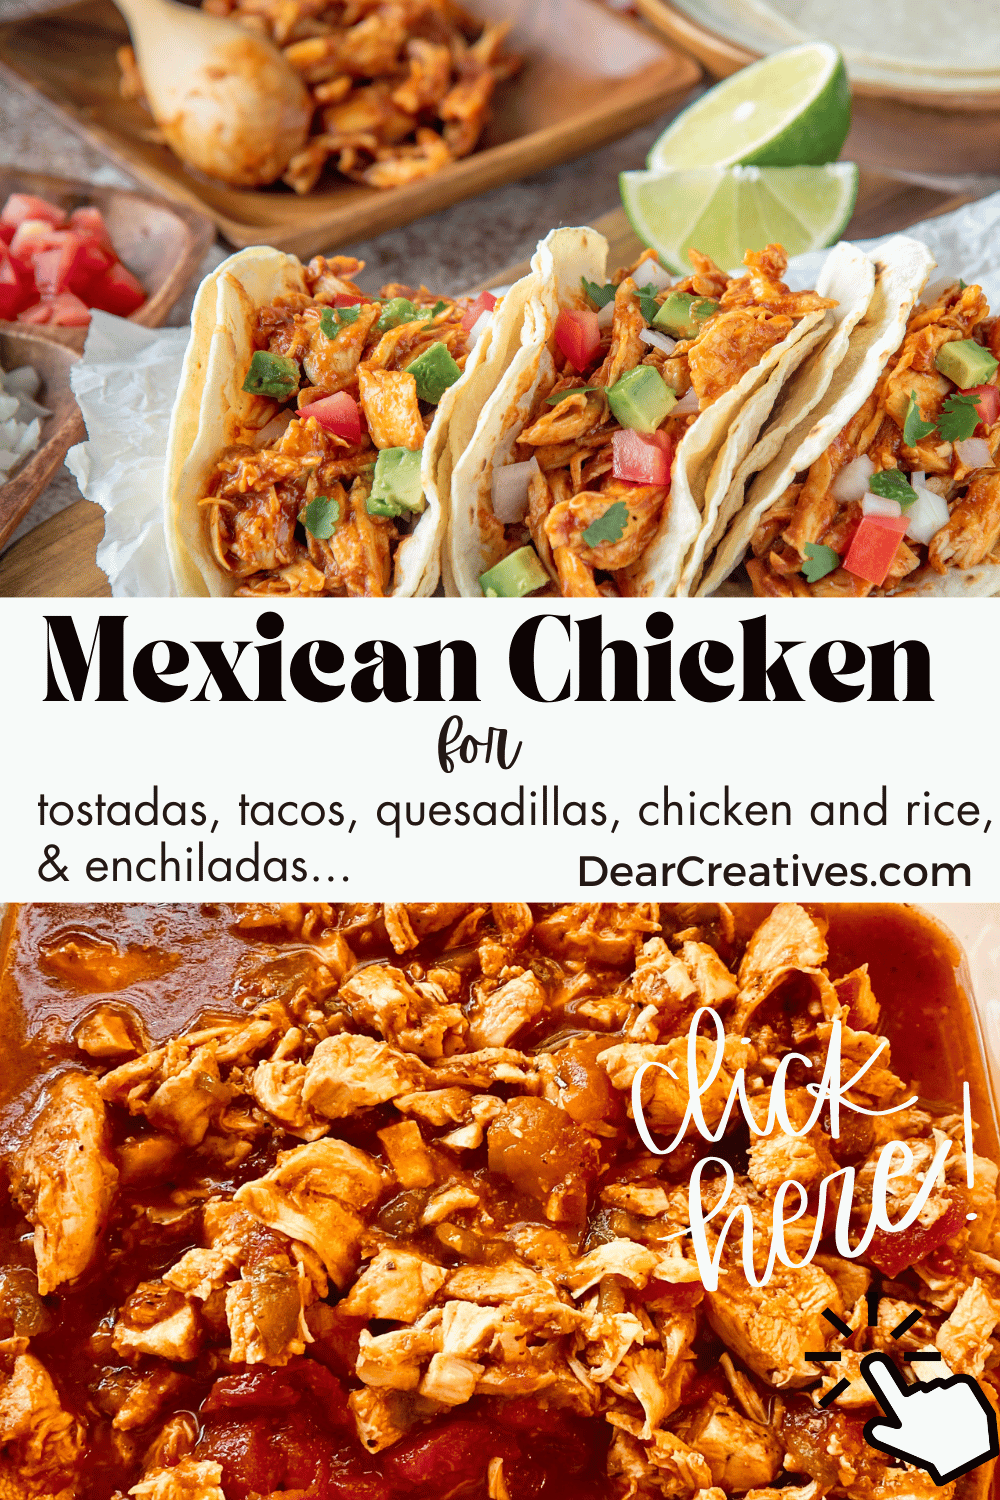 Mexican Chicken - Make Mexican Chicken on the stove - Cook the chicken and shred or dice it to use for tostadas, tacos, quesadillas, chicken and rice... DearCreatives.com